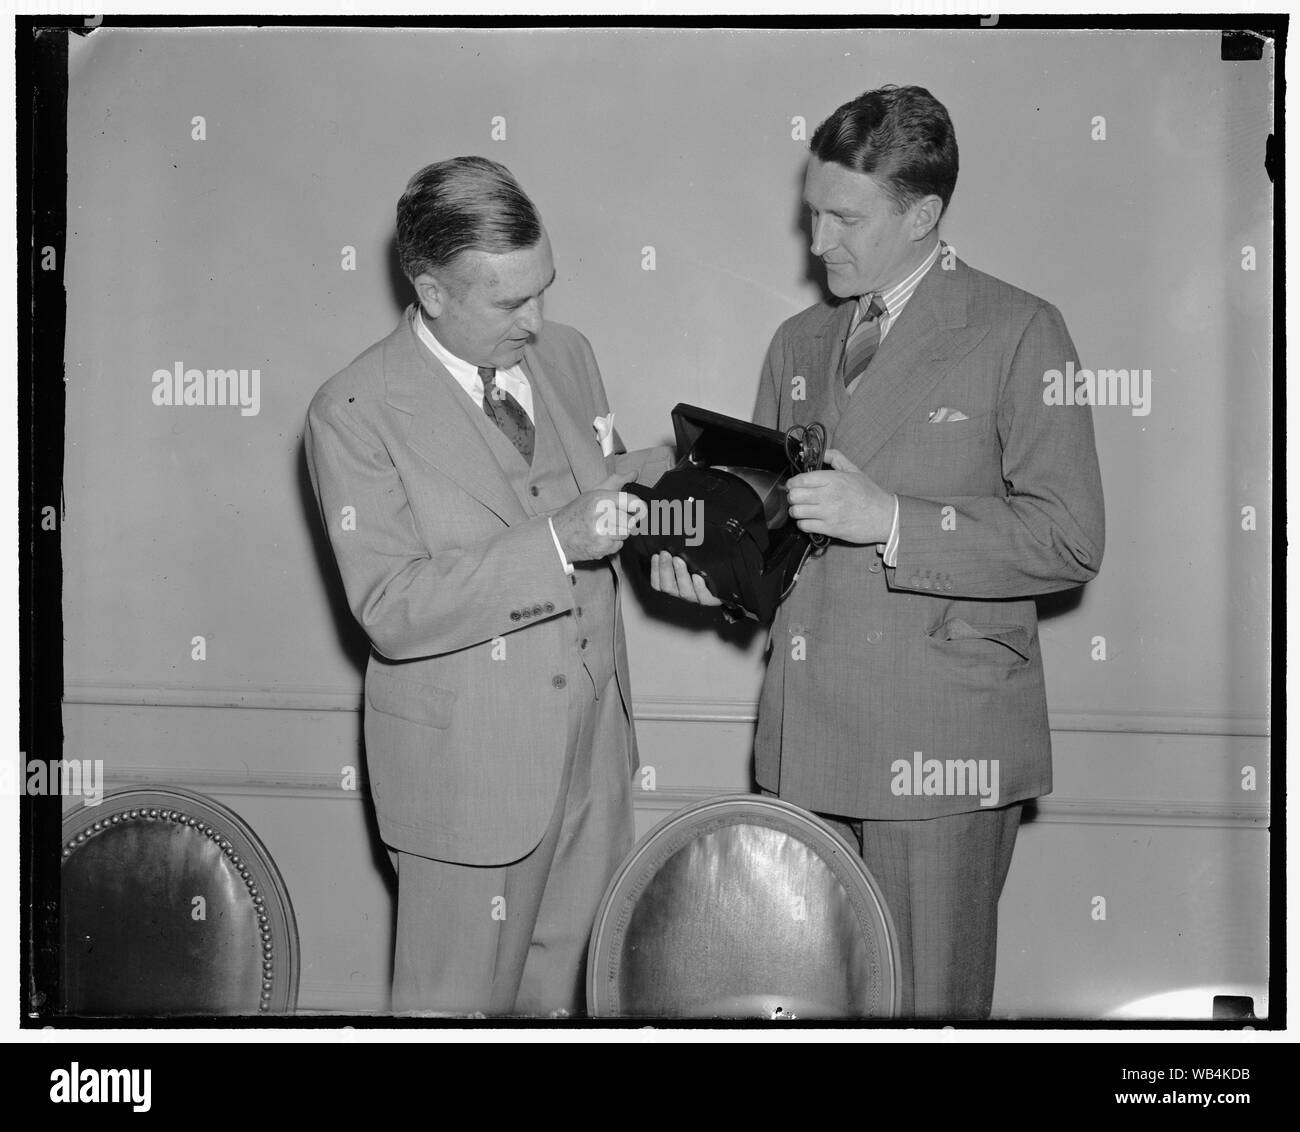 Edison receives first anti-glare lamp. Washington, D.C., May 17. Charles Edison, Asst. Sec. of the Navy and son of the late Thomas A. Edison, left; was presented with the first Polaroid lighting unit, a lamp free from glaring reflection. The lamp, praised by scientists as heralding a great advance in artificial illumination, employs the regulation incandescent light source as perfeted by Thomas A. Edison but passes the light through a sheet of the new light controlling material, Polaroid, to remove the light waves responsible for refelcted glare, one of the worst visual hazards of illumination Stock Photo